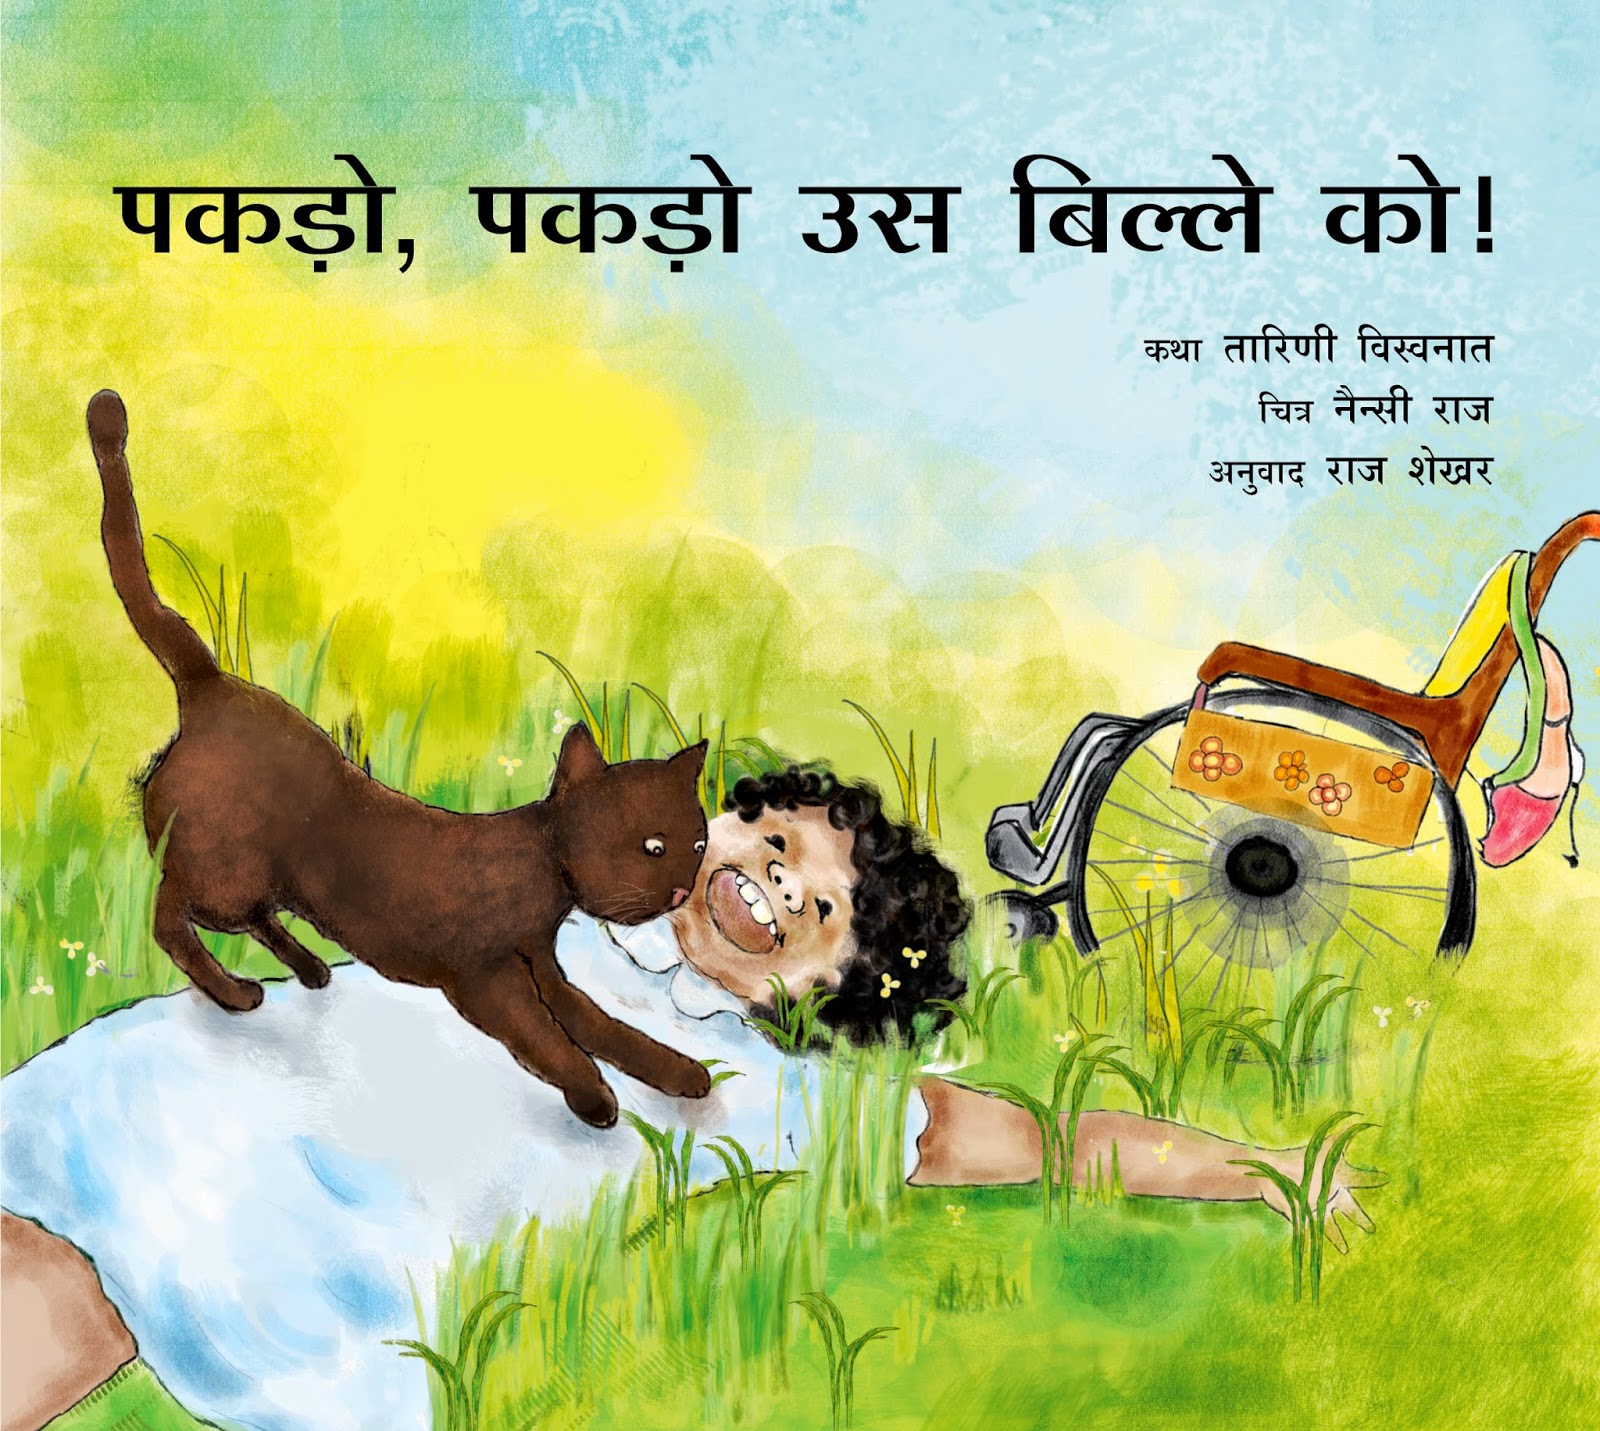 http://tulikabooks.com/our-books/picture-books/general-picture-books/catch-that-cat